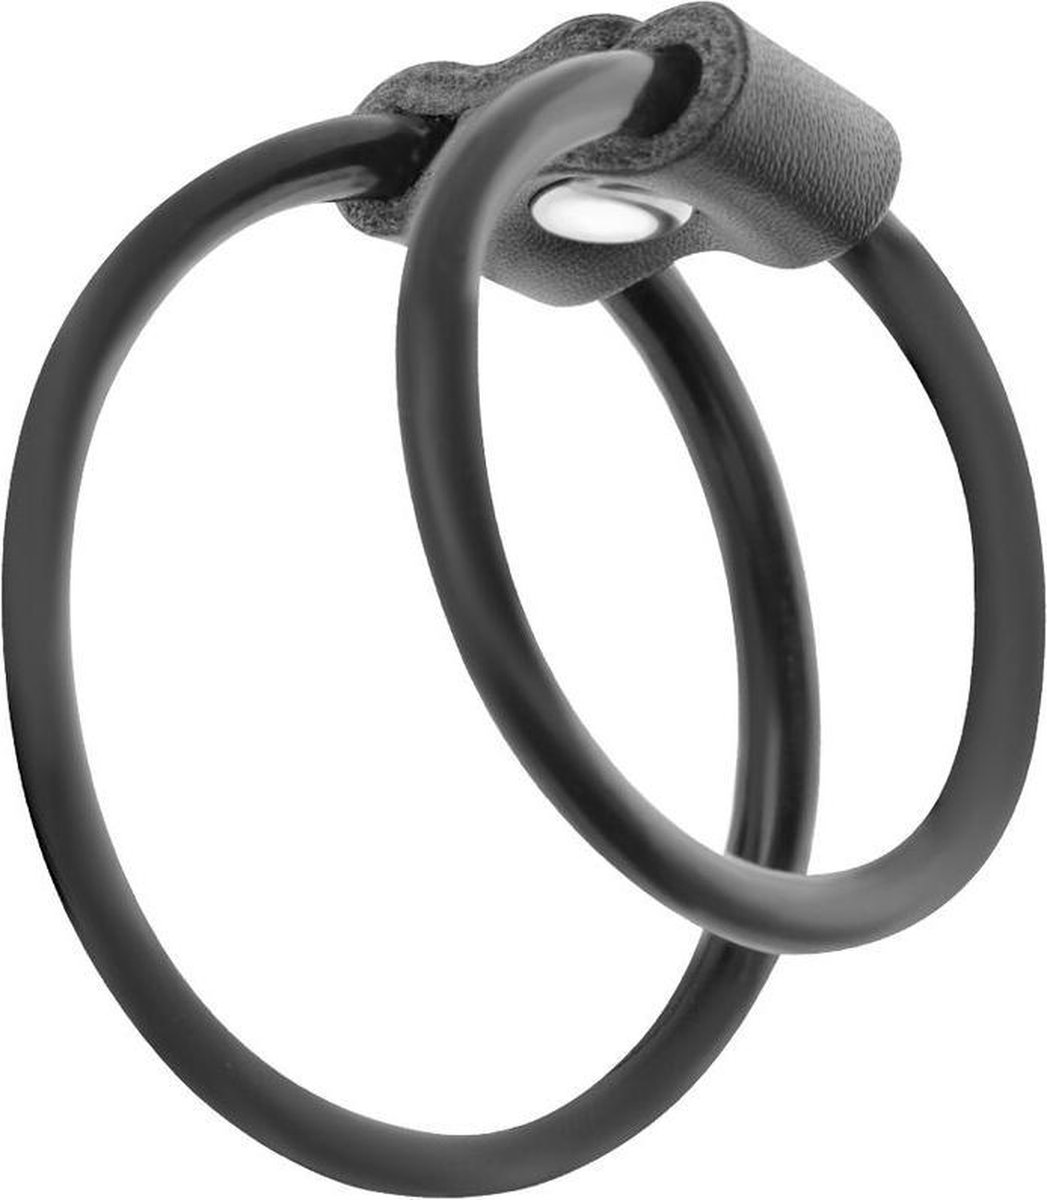 DARKNESS BONDAGE | Darkness Duo Rings For Penis